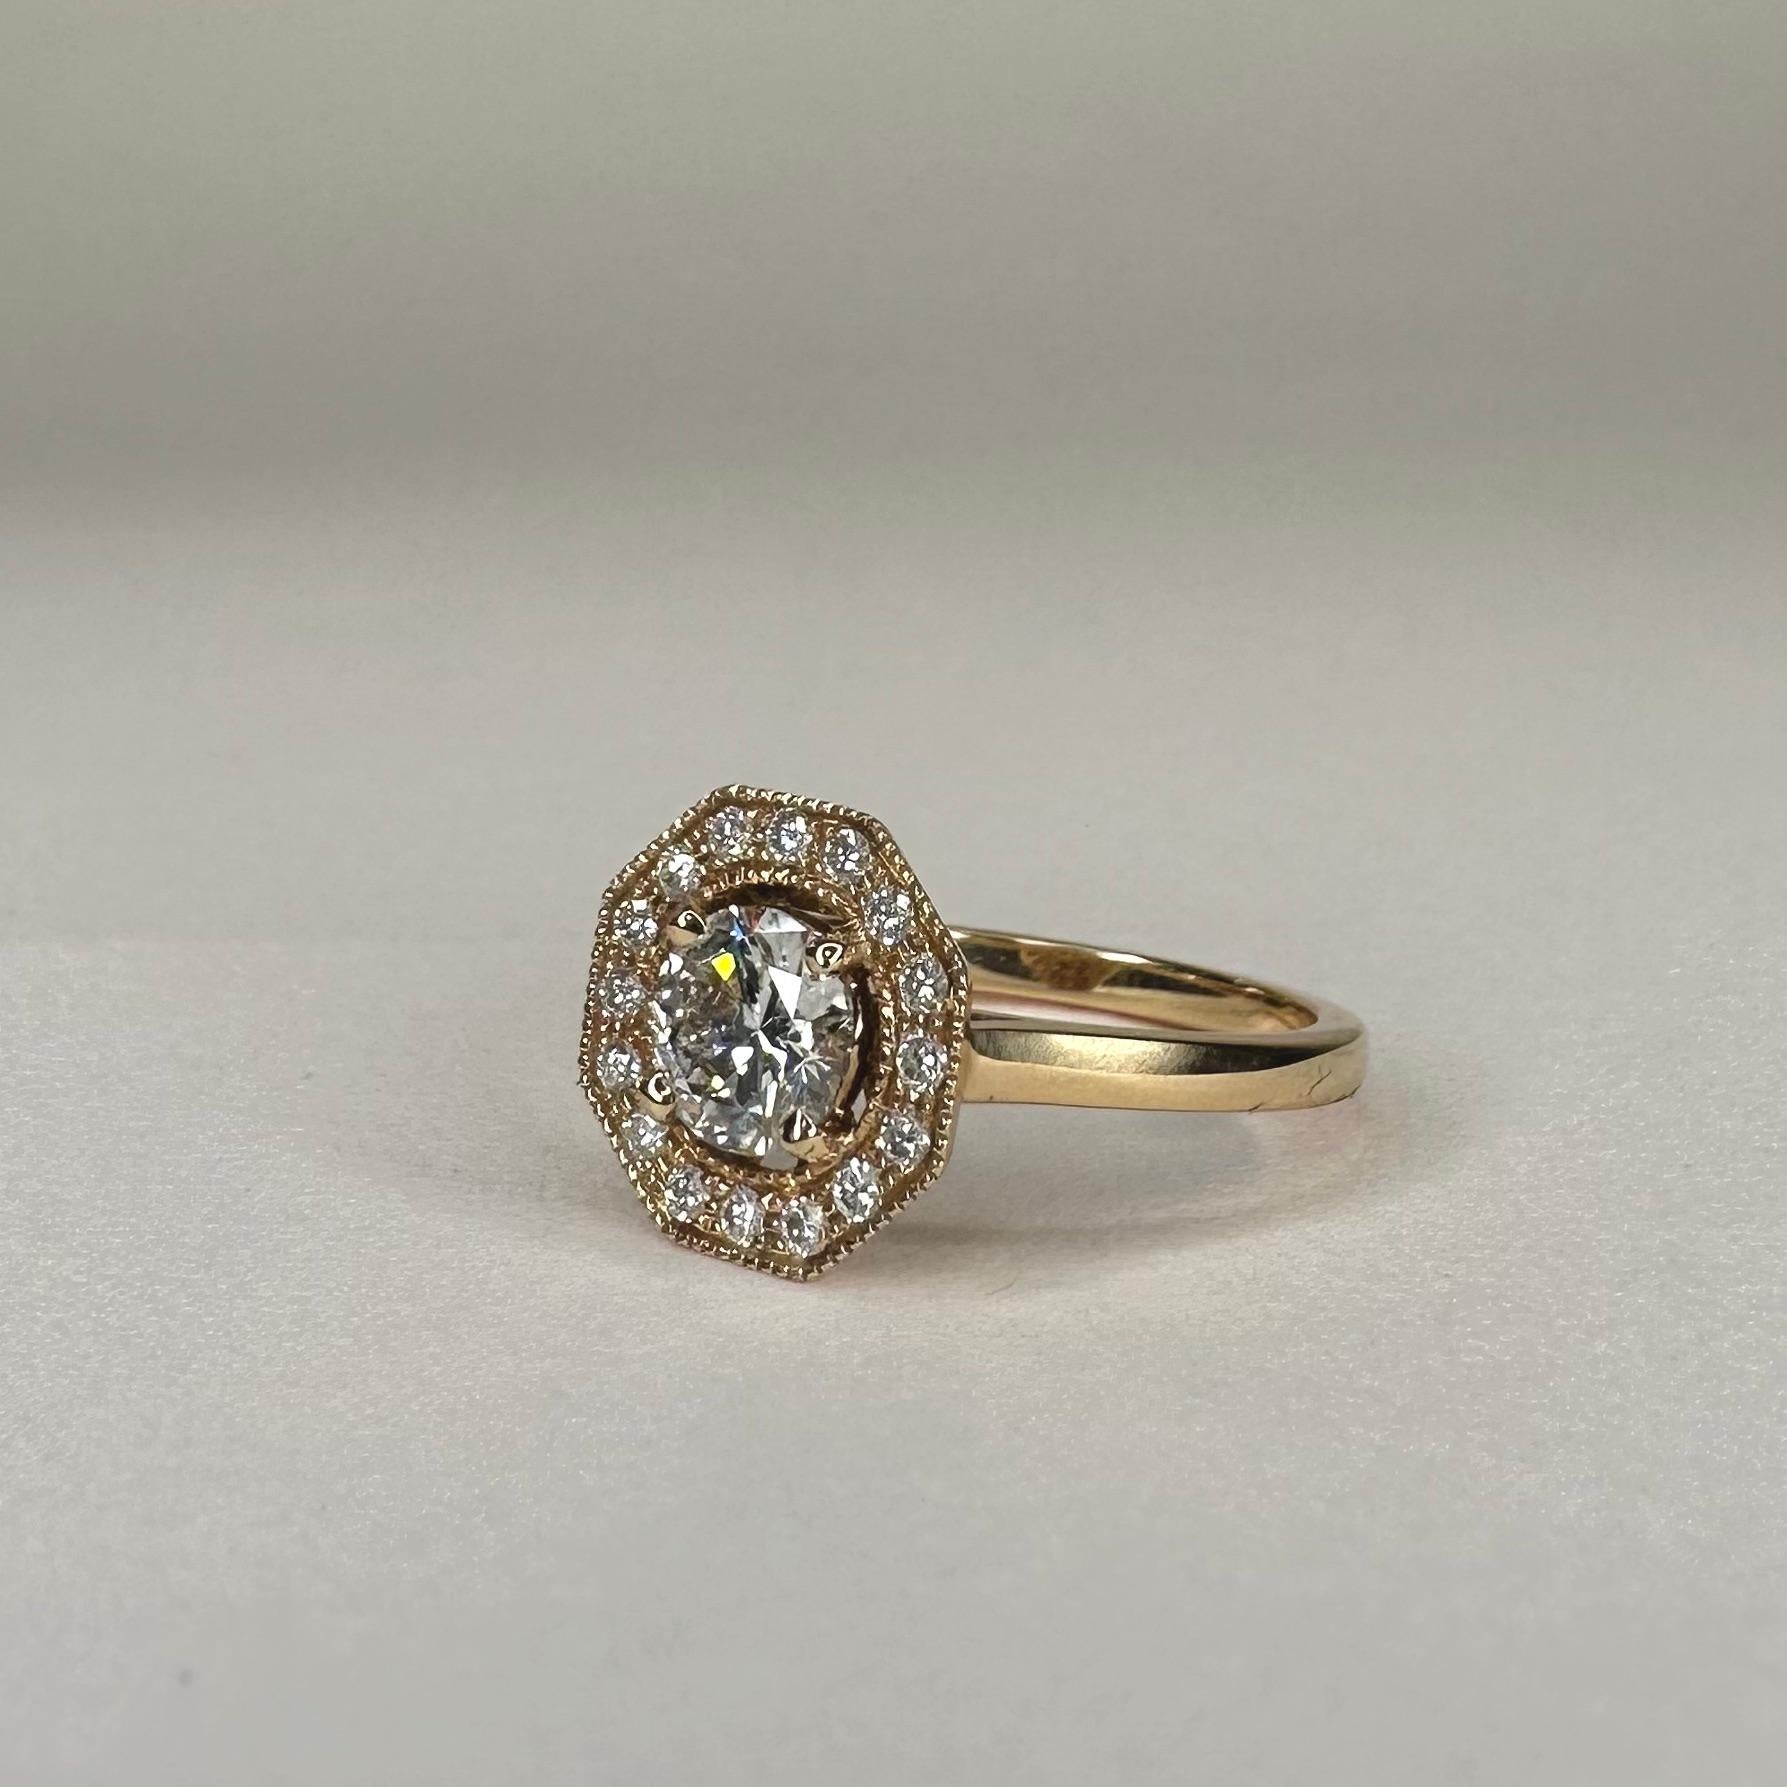 For Sale:  18k Yellow Gold Art Deco Style Ring 0.7 Ct Brilliant Cut Diamond and 0.15 Cts 5